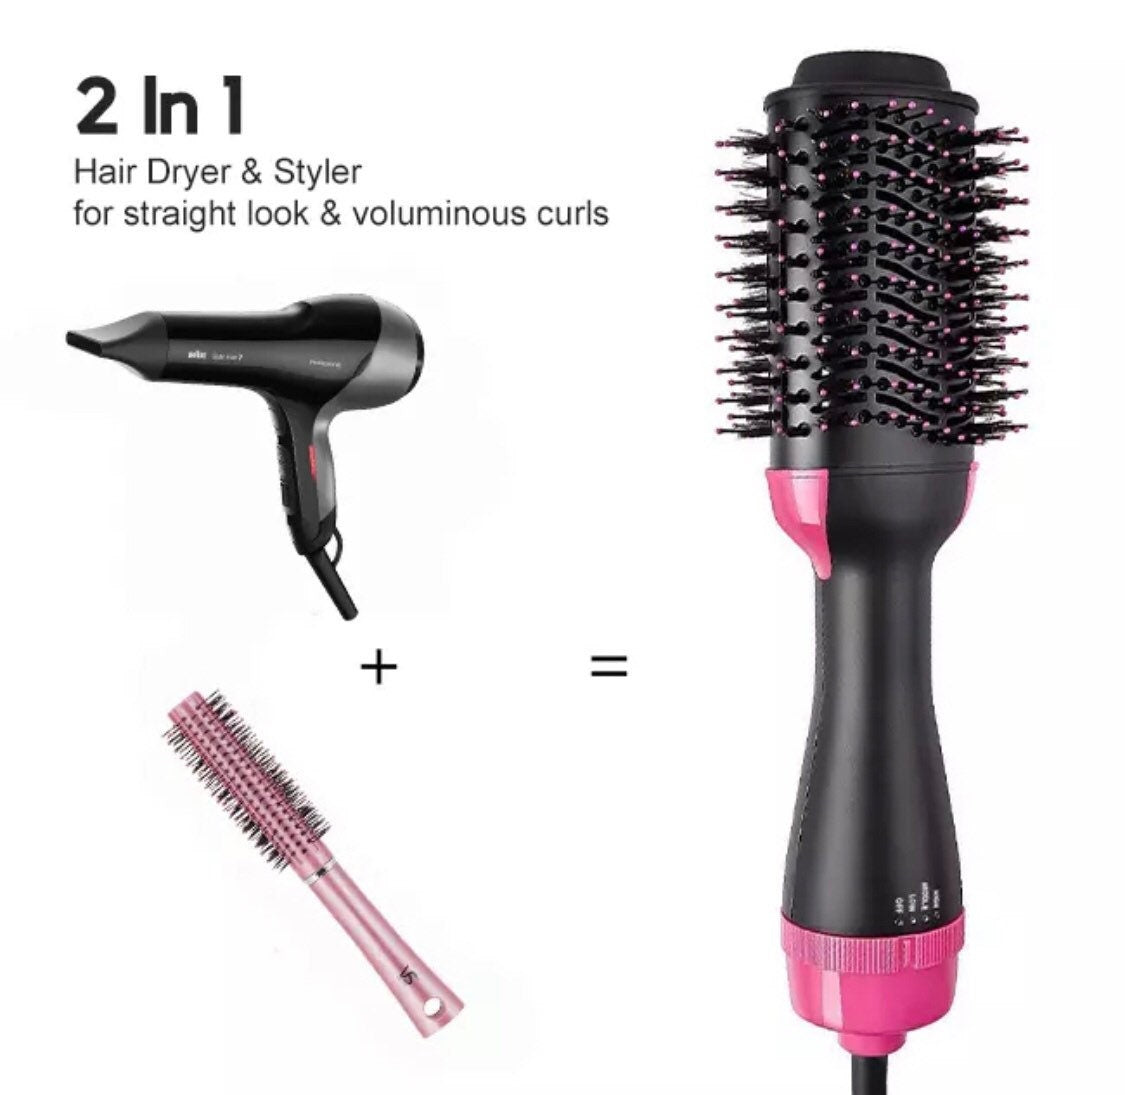 PRIVATE LABEL Wholesale Luxury PREMIUM quality Customizable 3-in-1 Hair Curling Brush/Blow-dryer/Straightener, Multifunctional Styler 300pcs